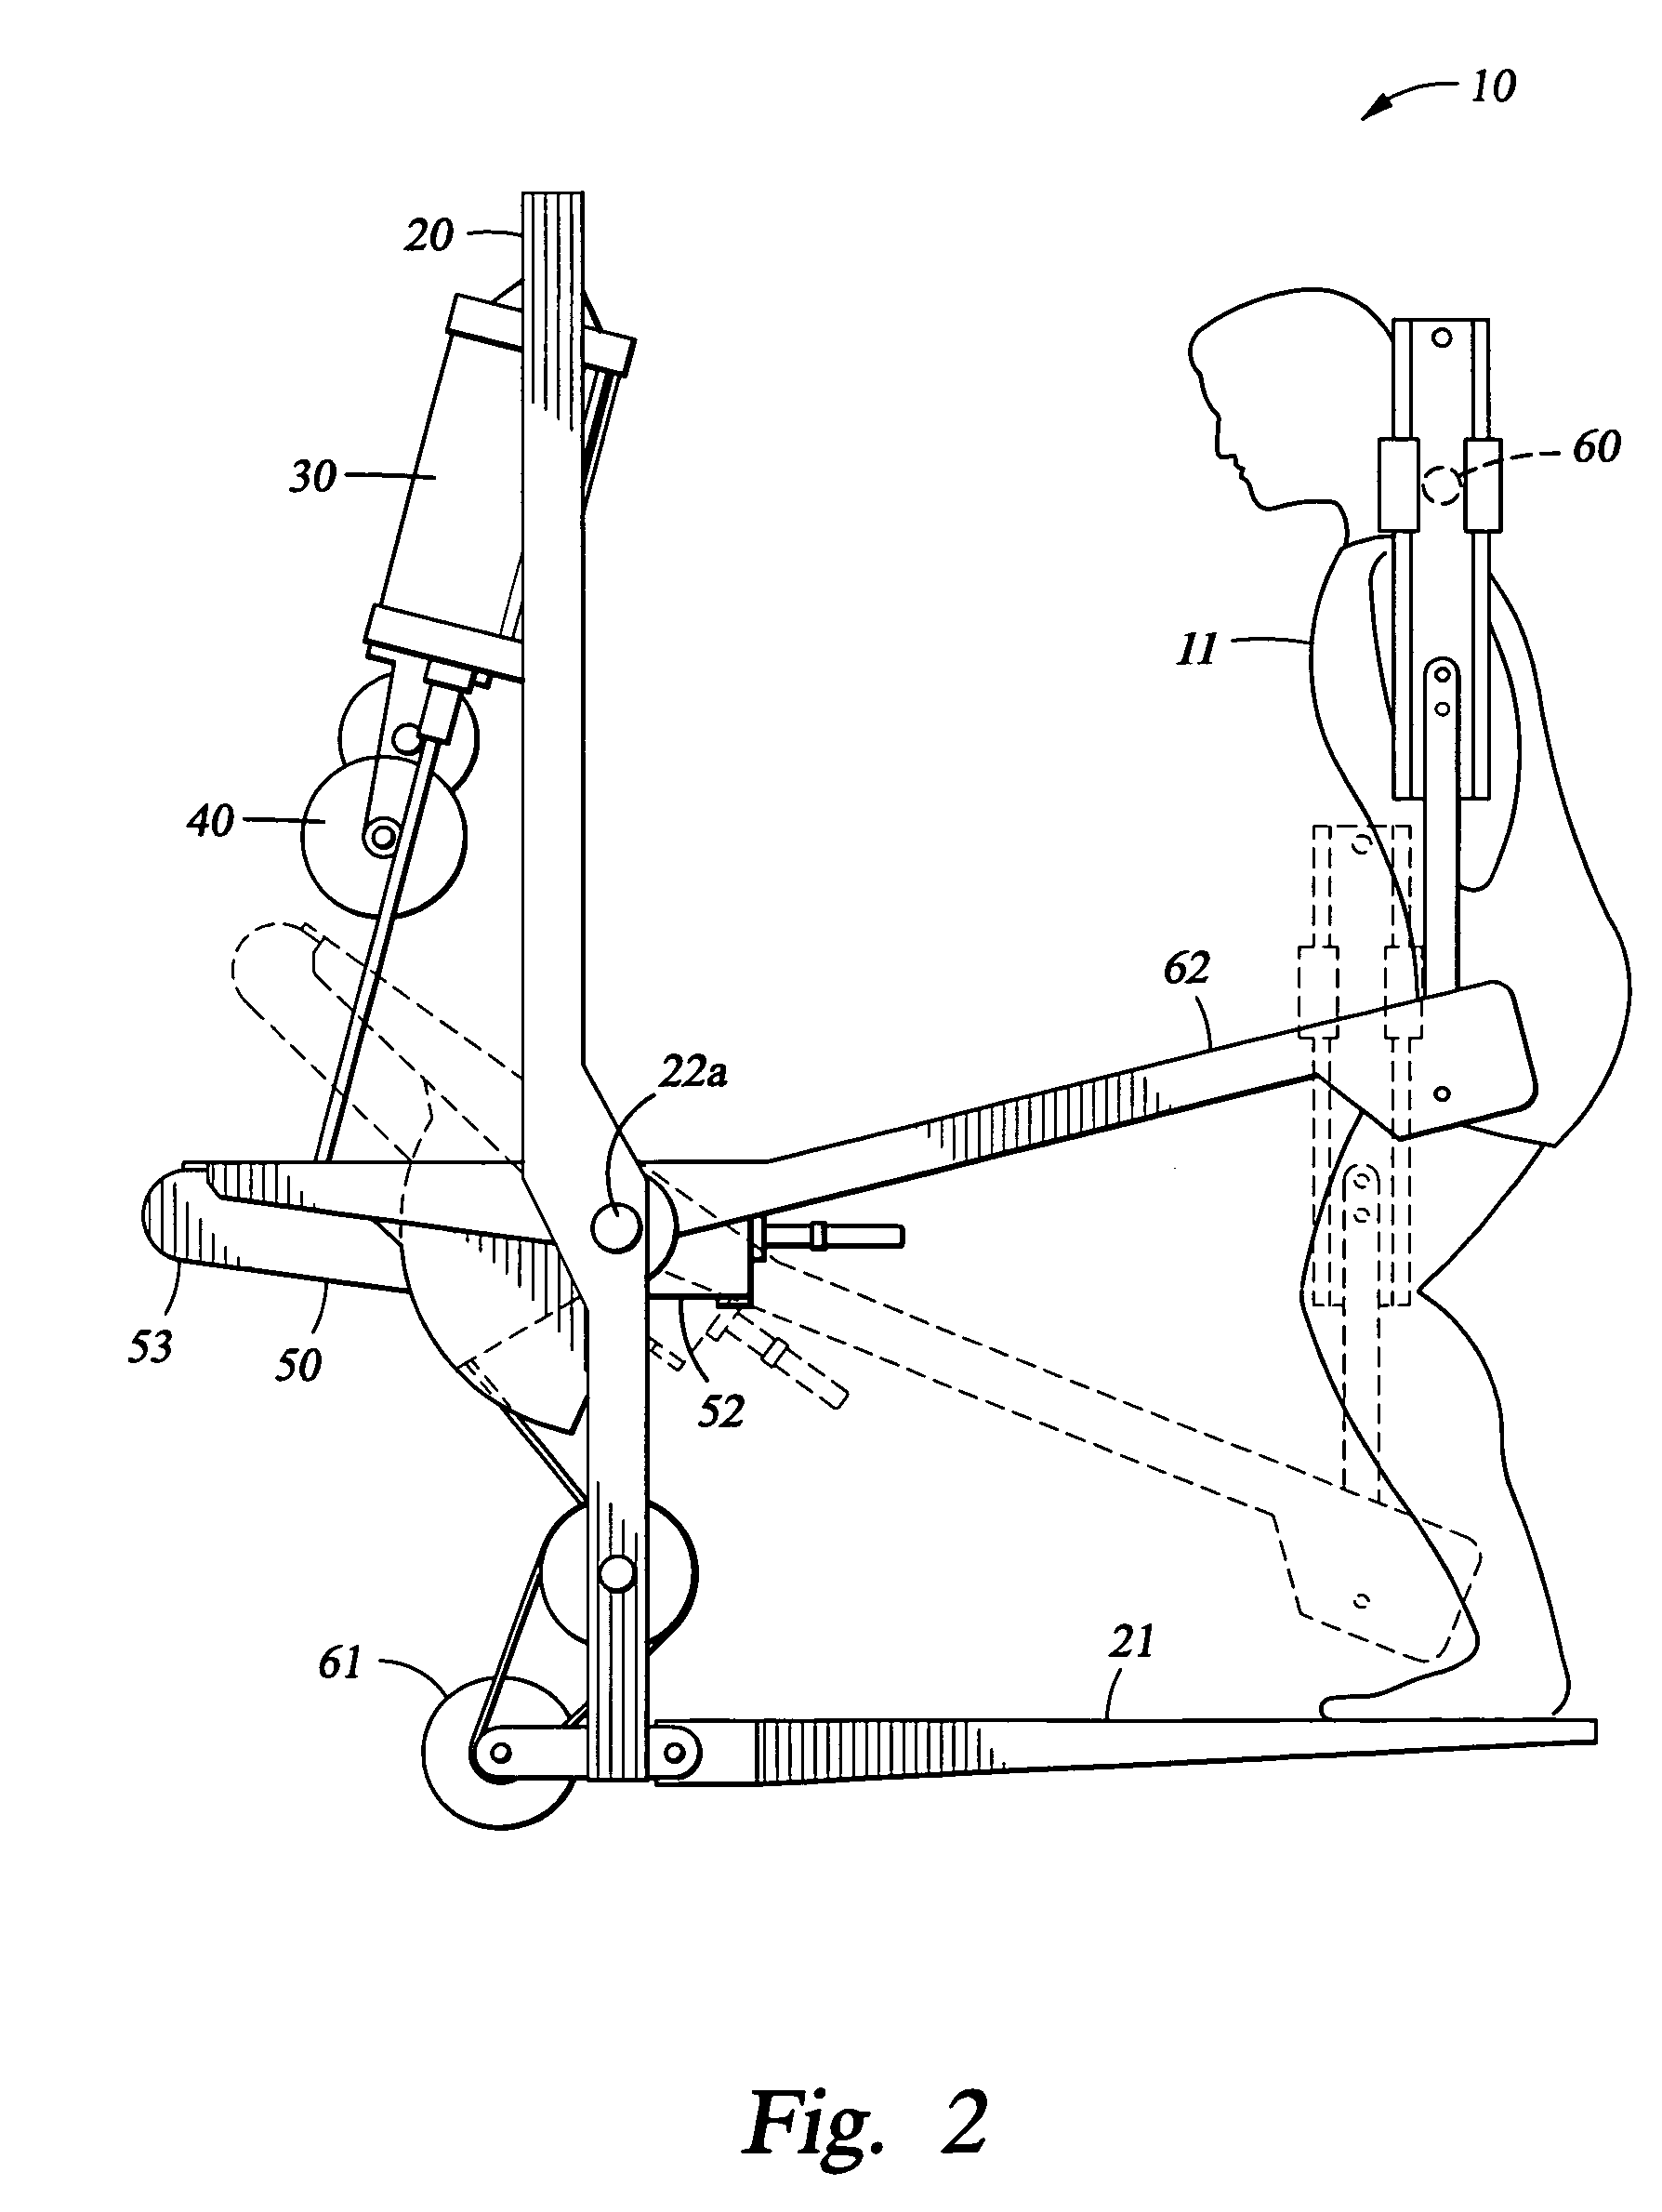 Advanced resistive exercise device